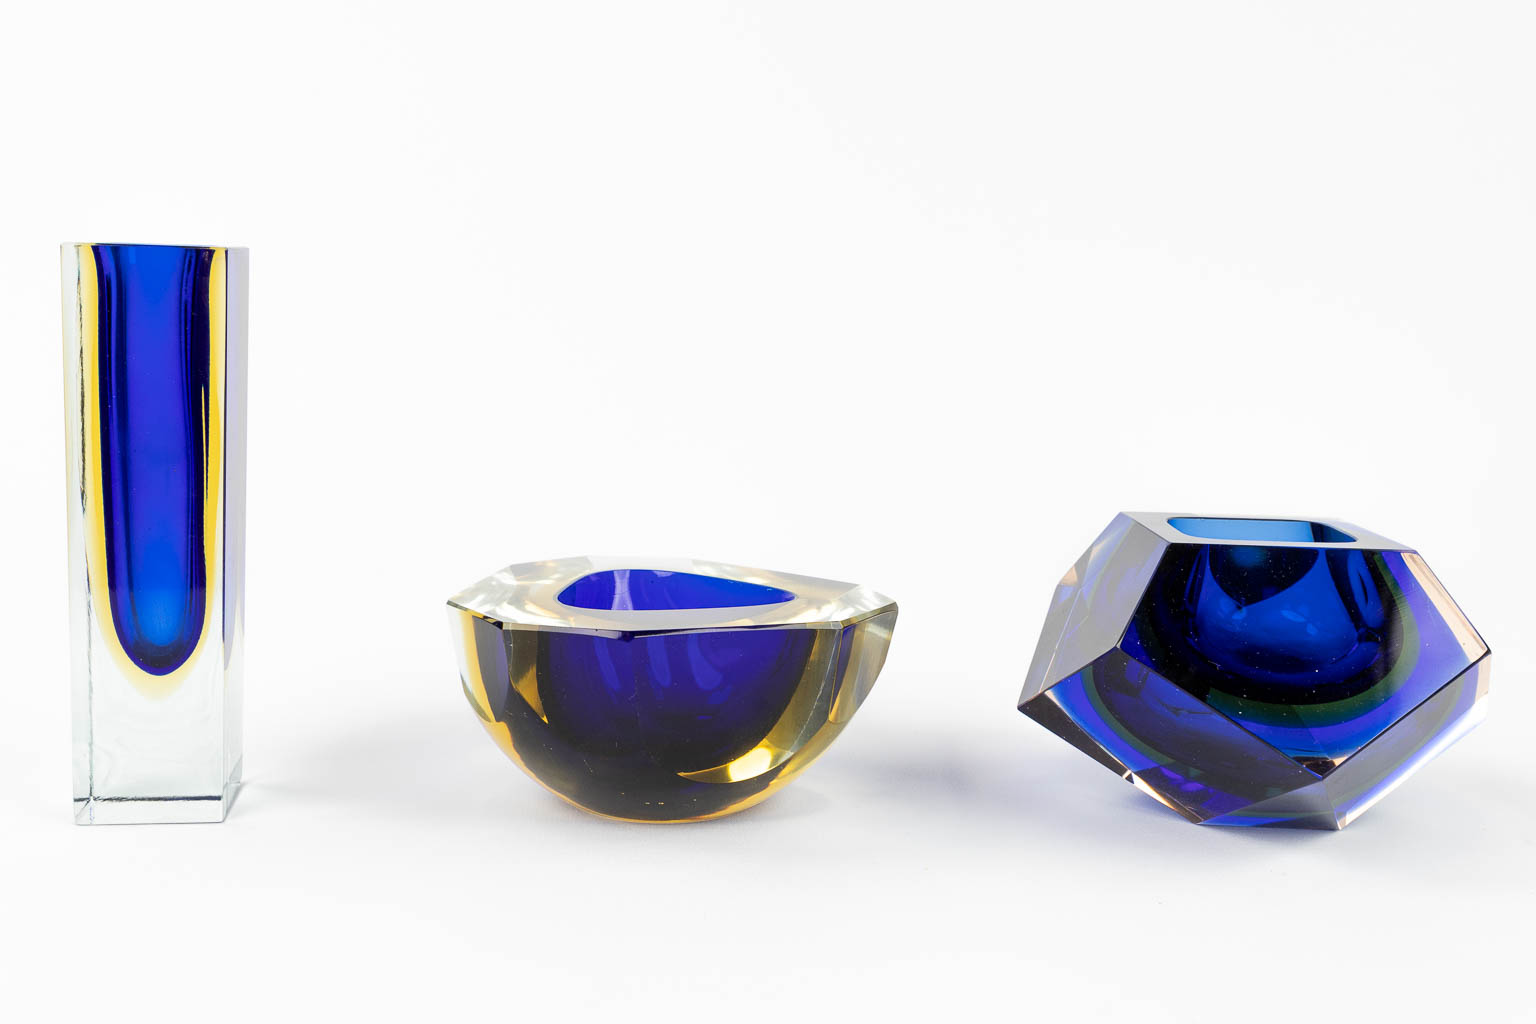 A collection of 3 'Somerso' glass items, made in Murano, Italy. (L:3,7 x W:3,7 x H:15 cm) - Image 6 of 13